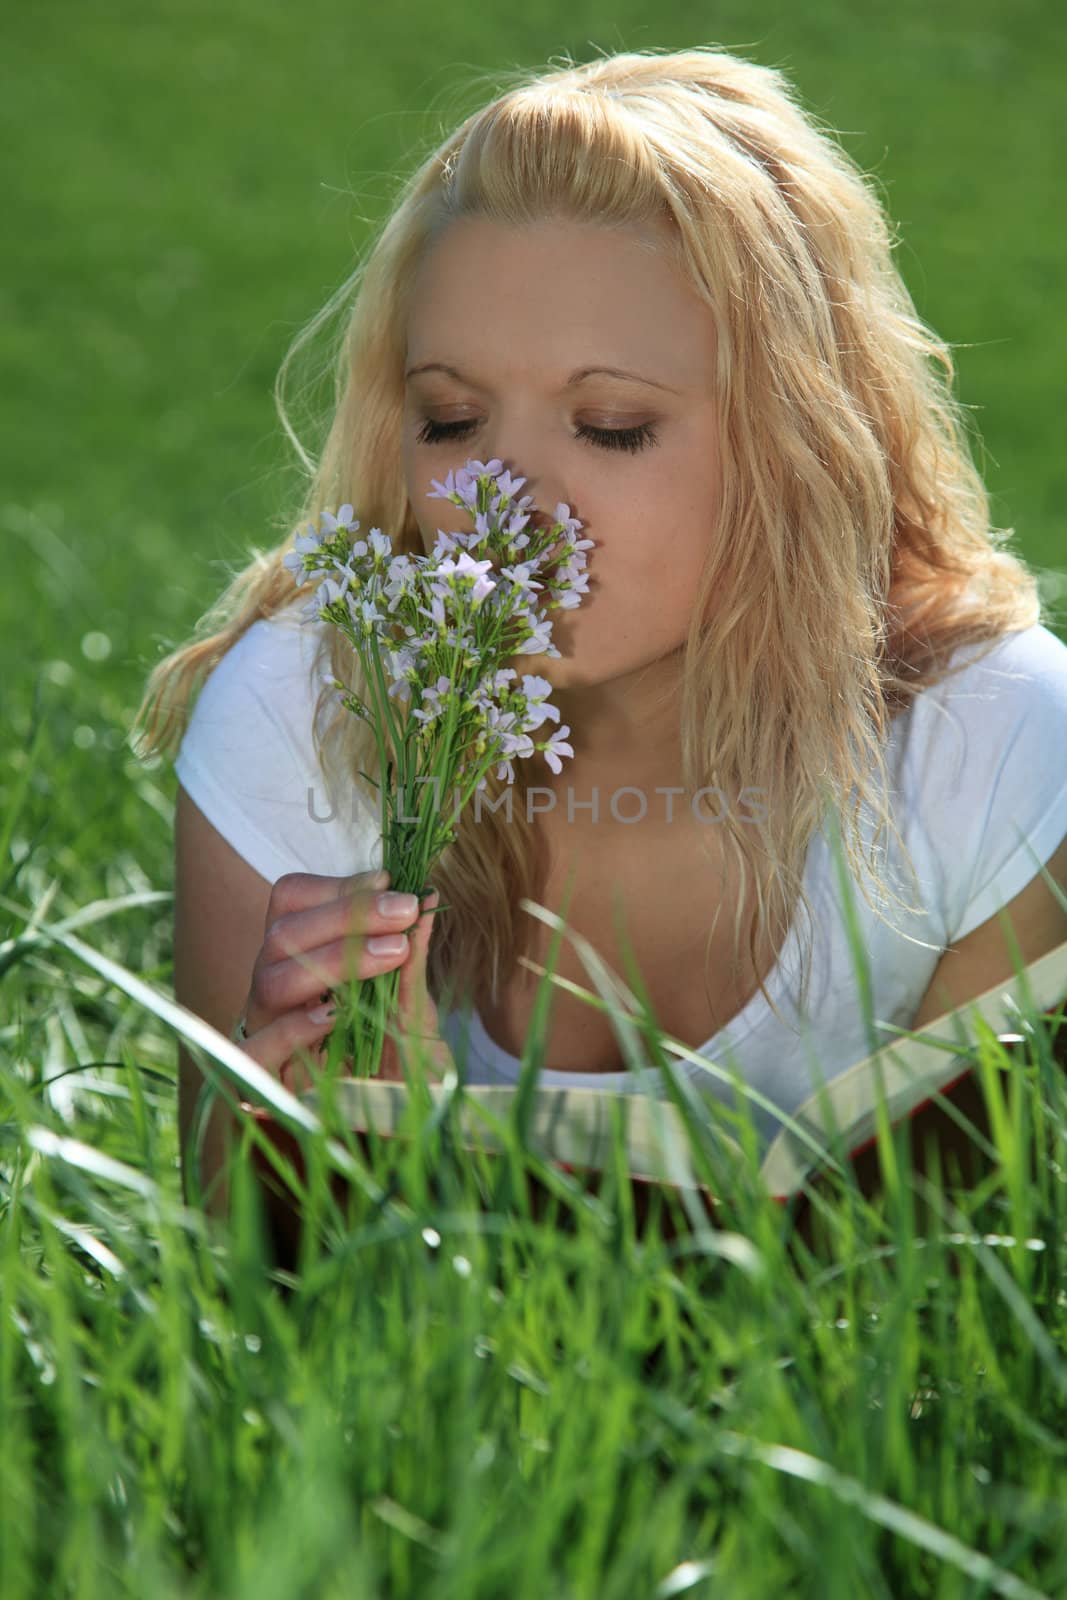 Attractive young woman resting outside on green meadow.